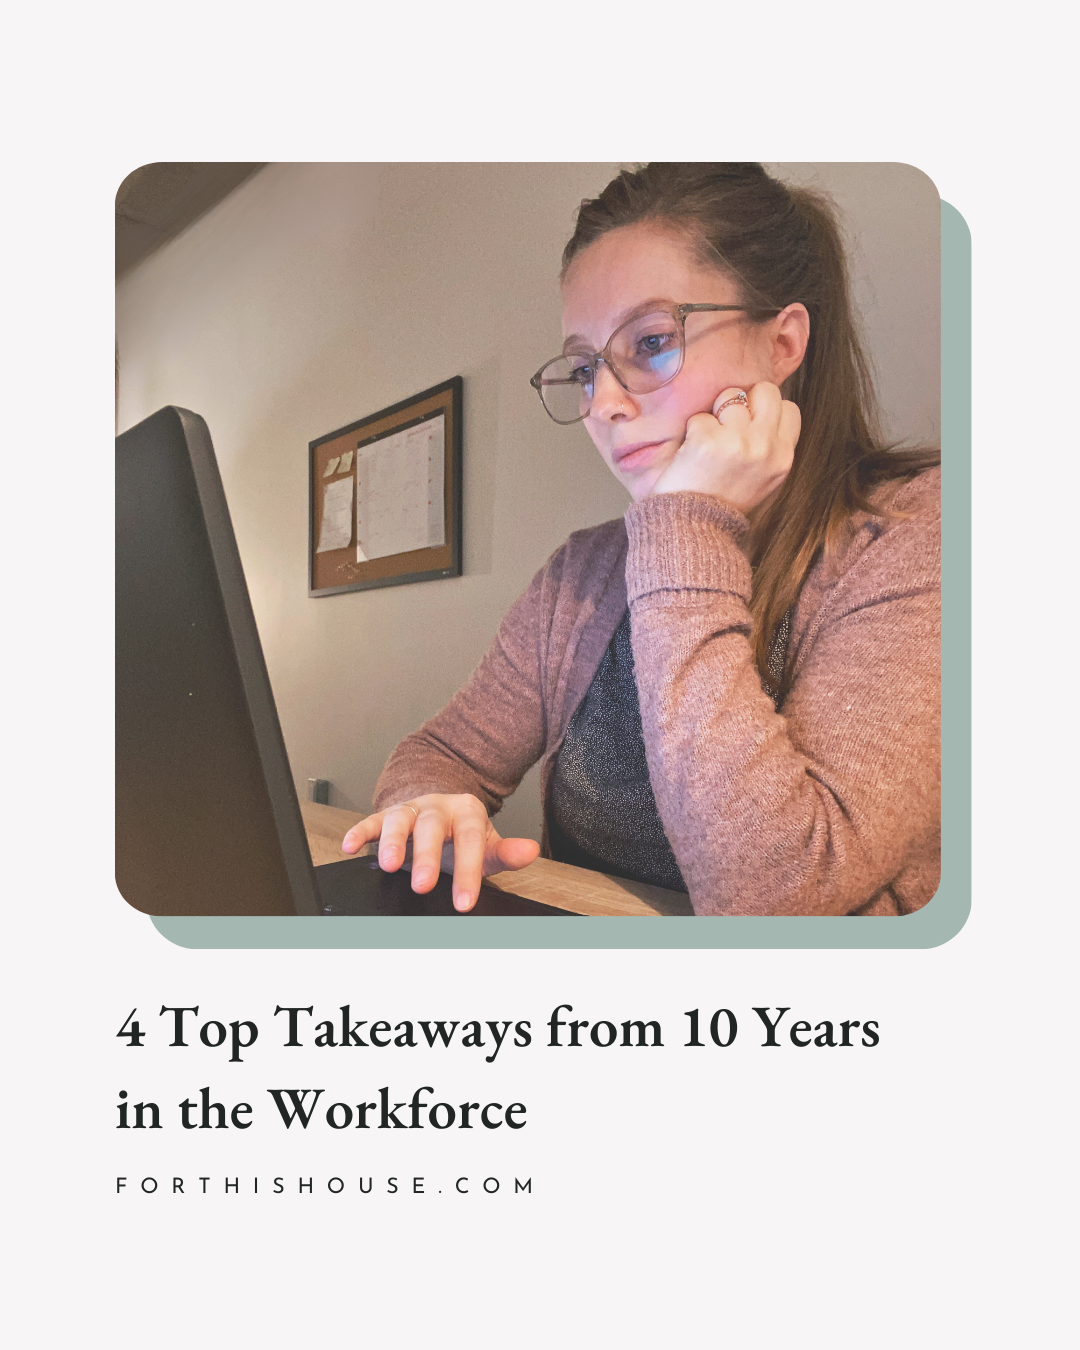 4 Top Takeaways from 10 Years in the Workforce